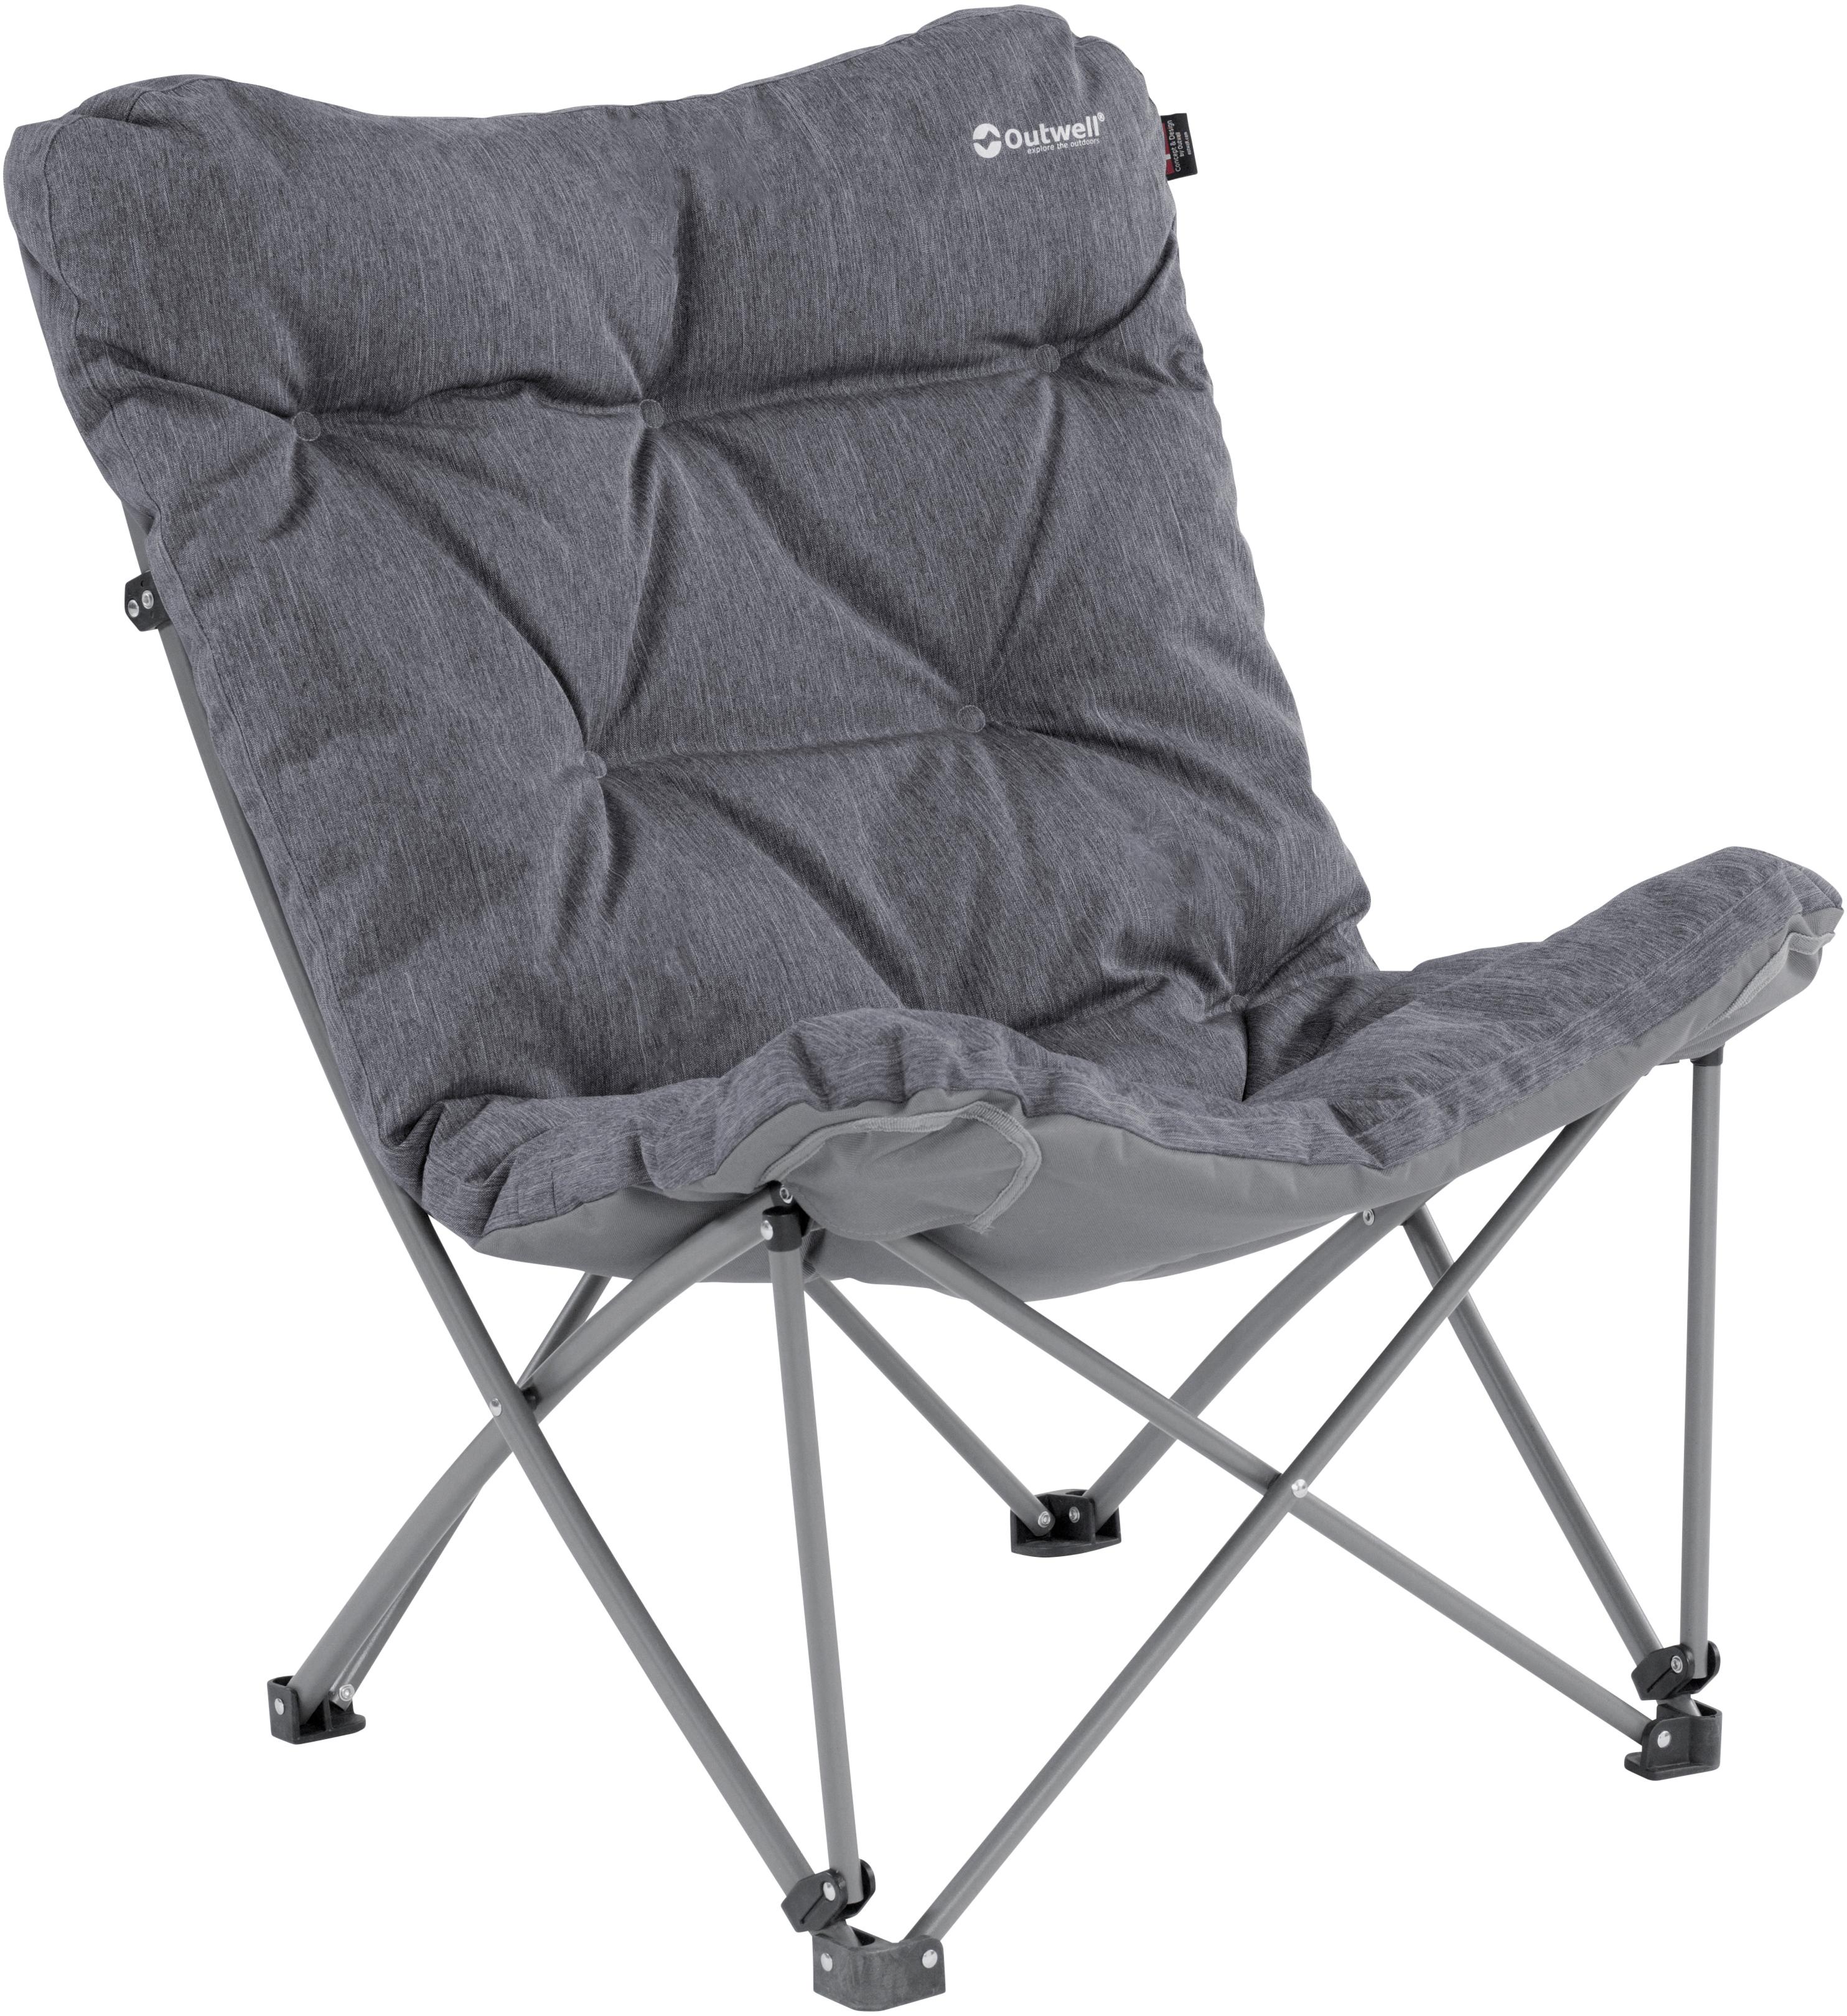 Outwell Fremont Lake Camping Chairno size